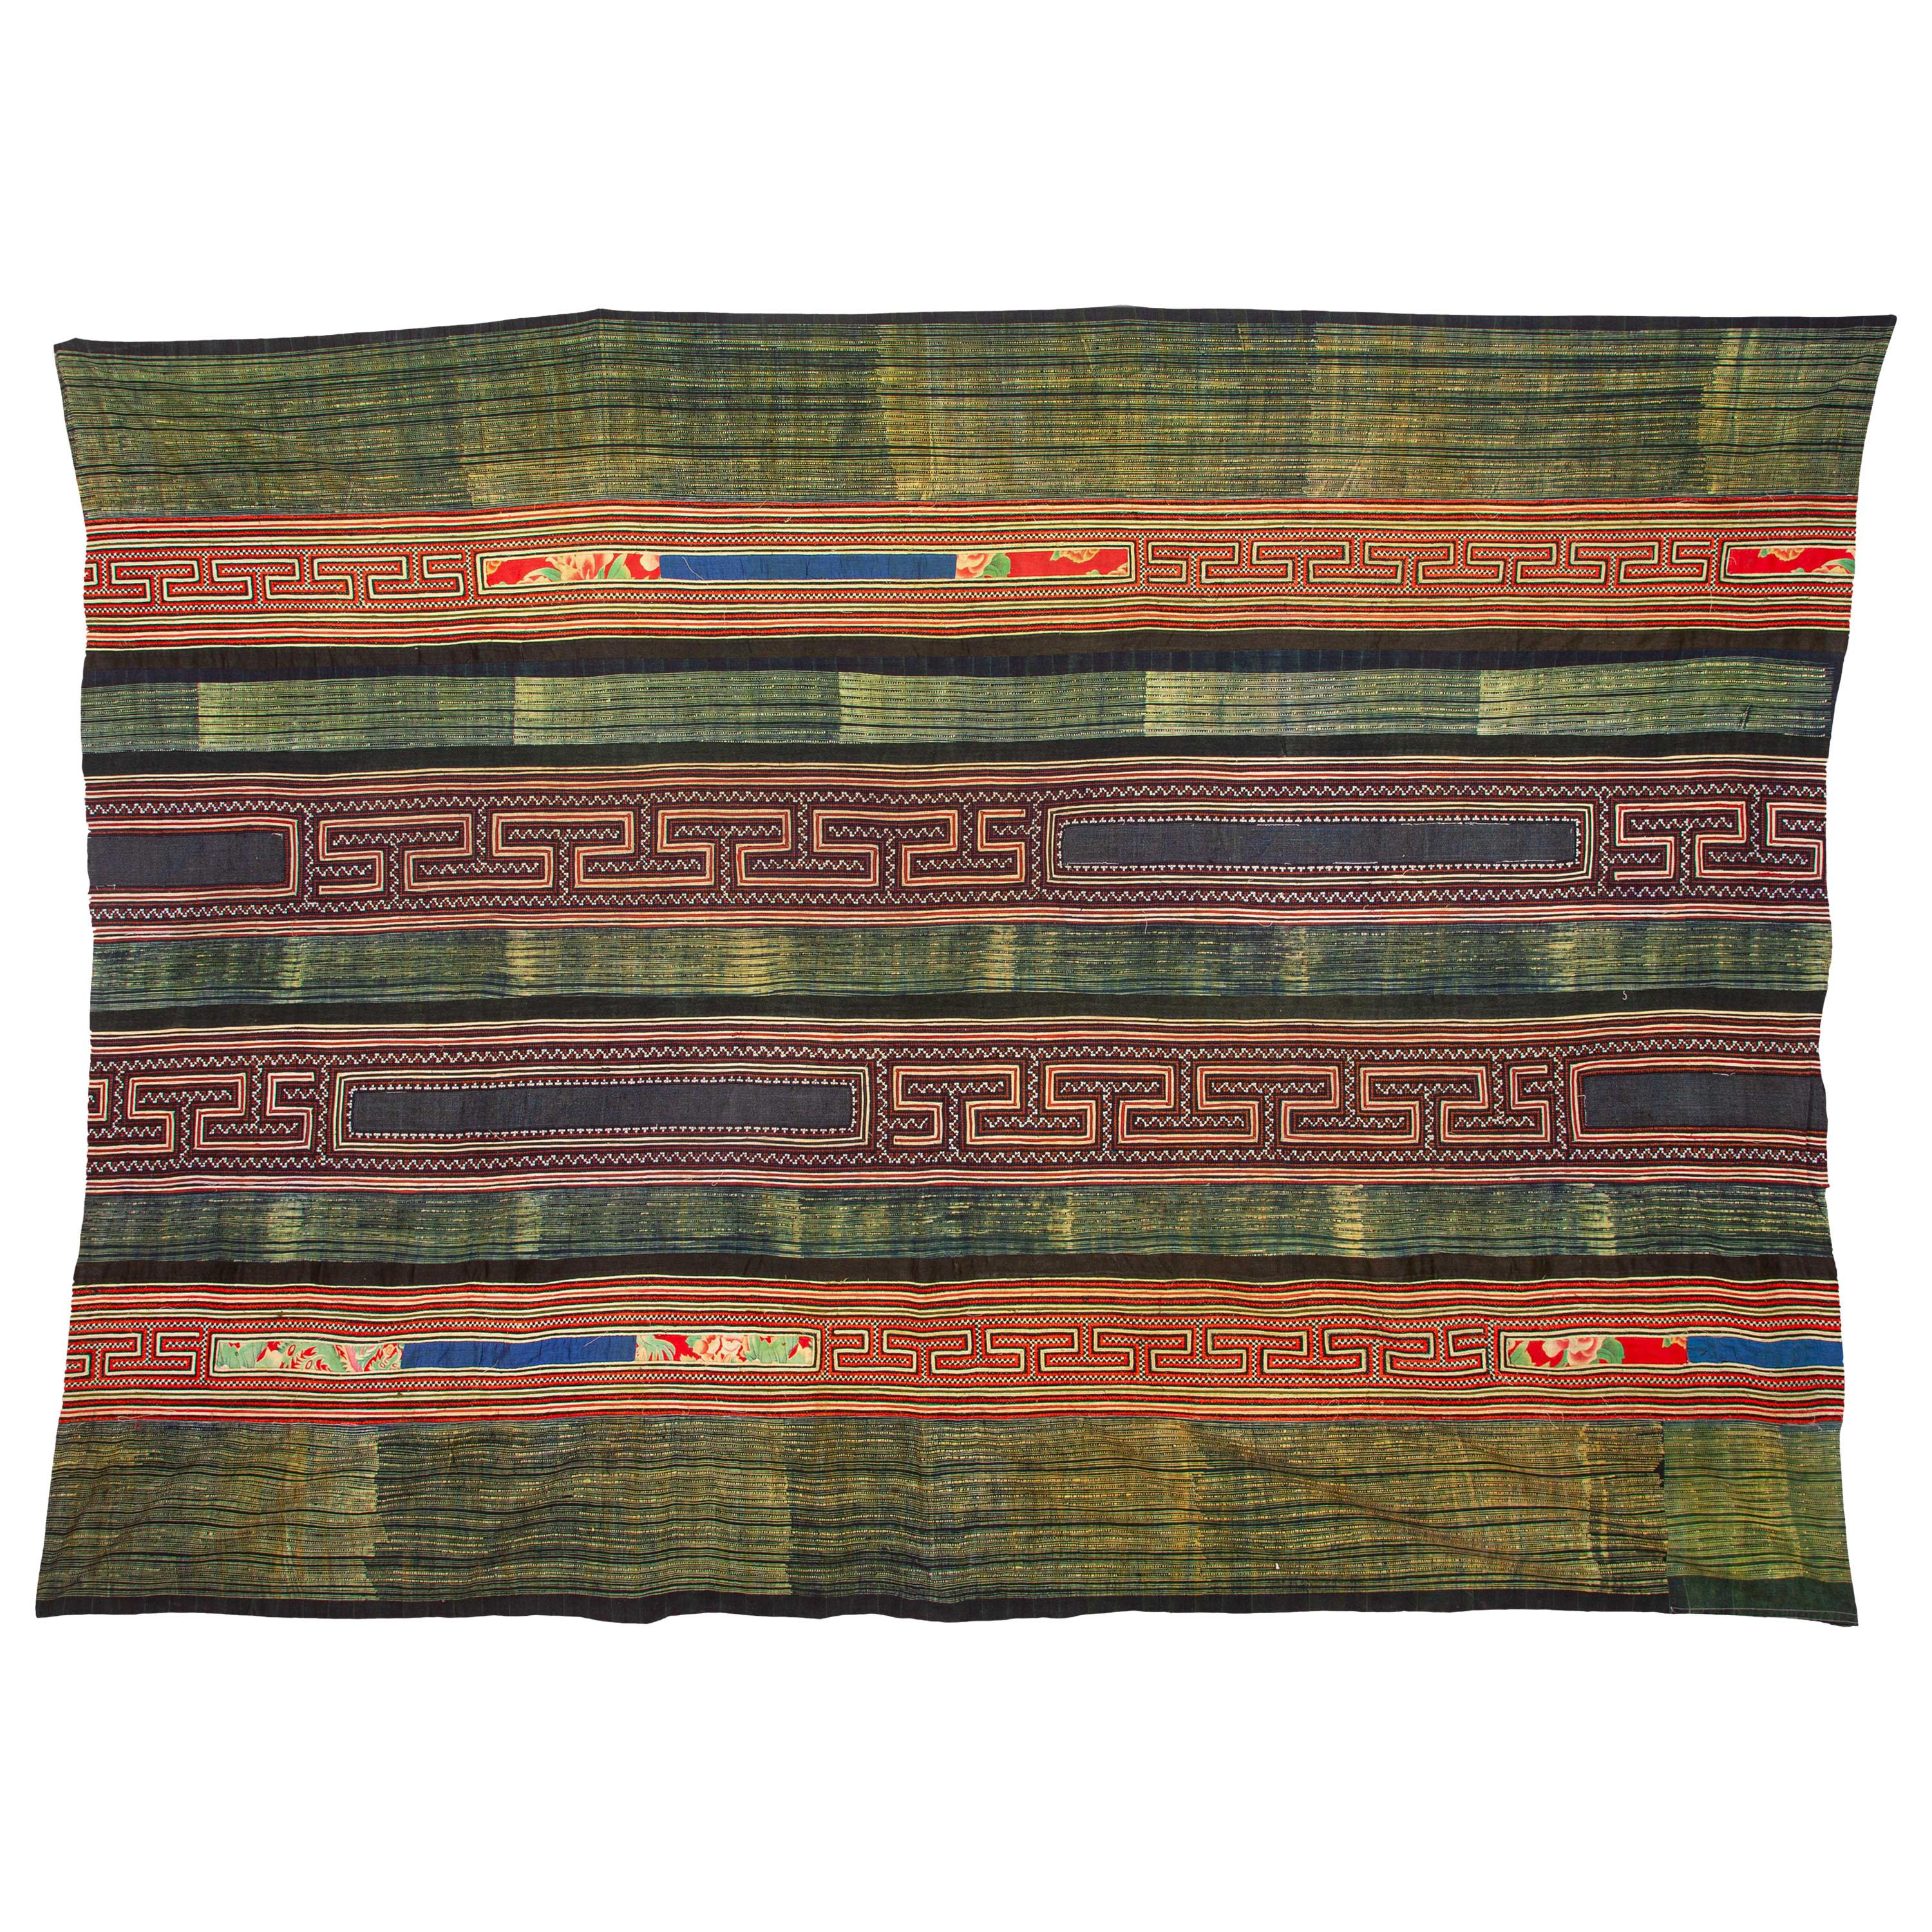 Hmong Batik and Embroidered Blanket with Indigo Based Green Color